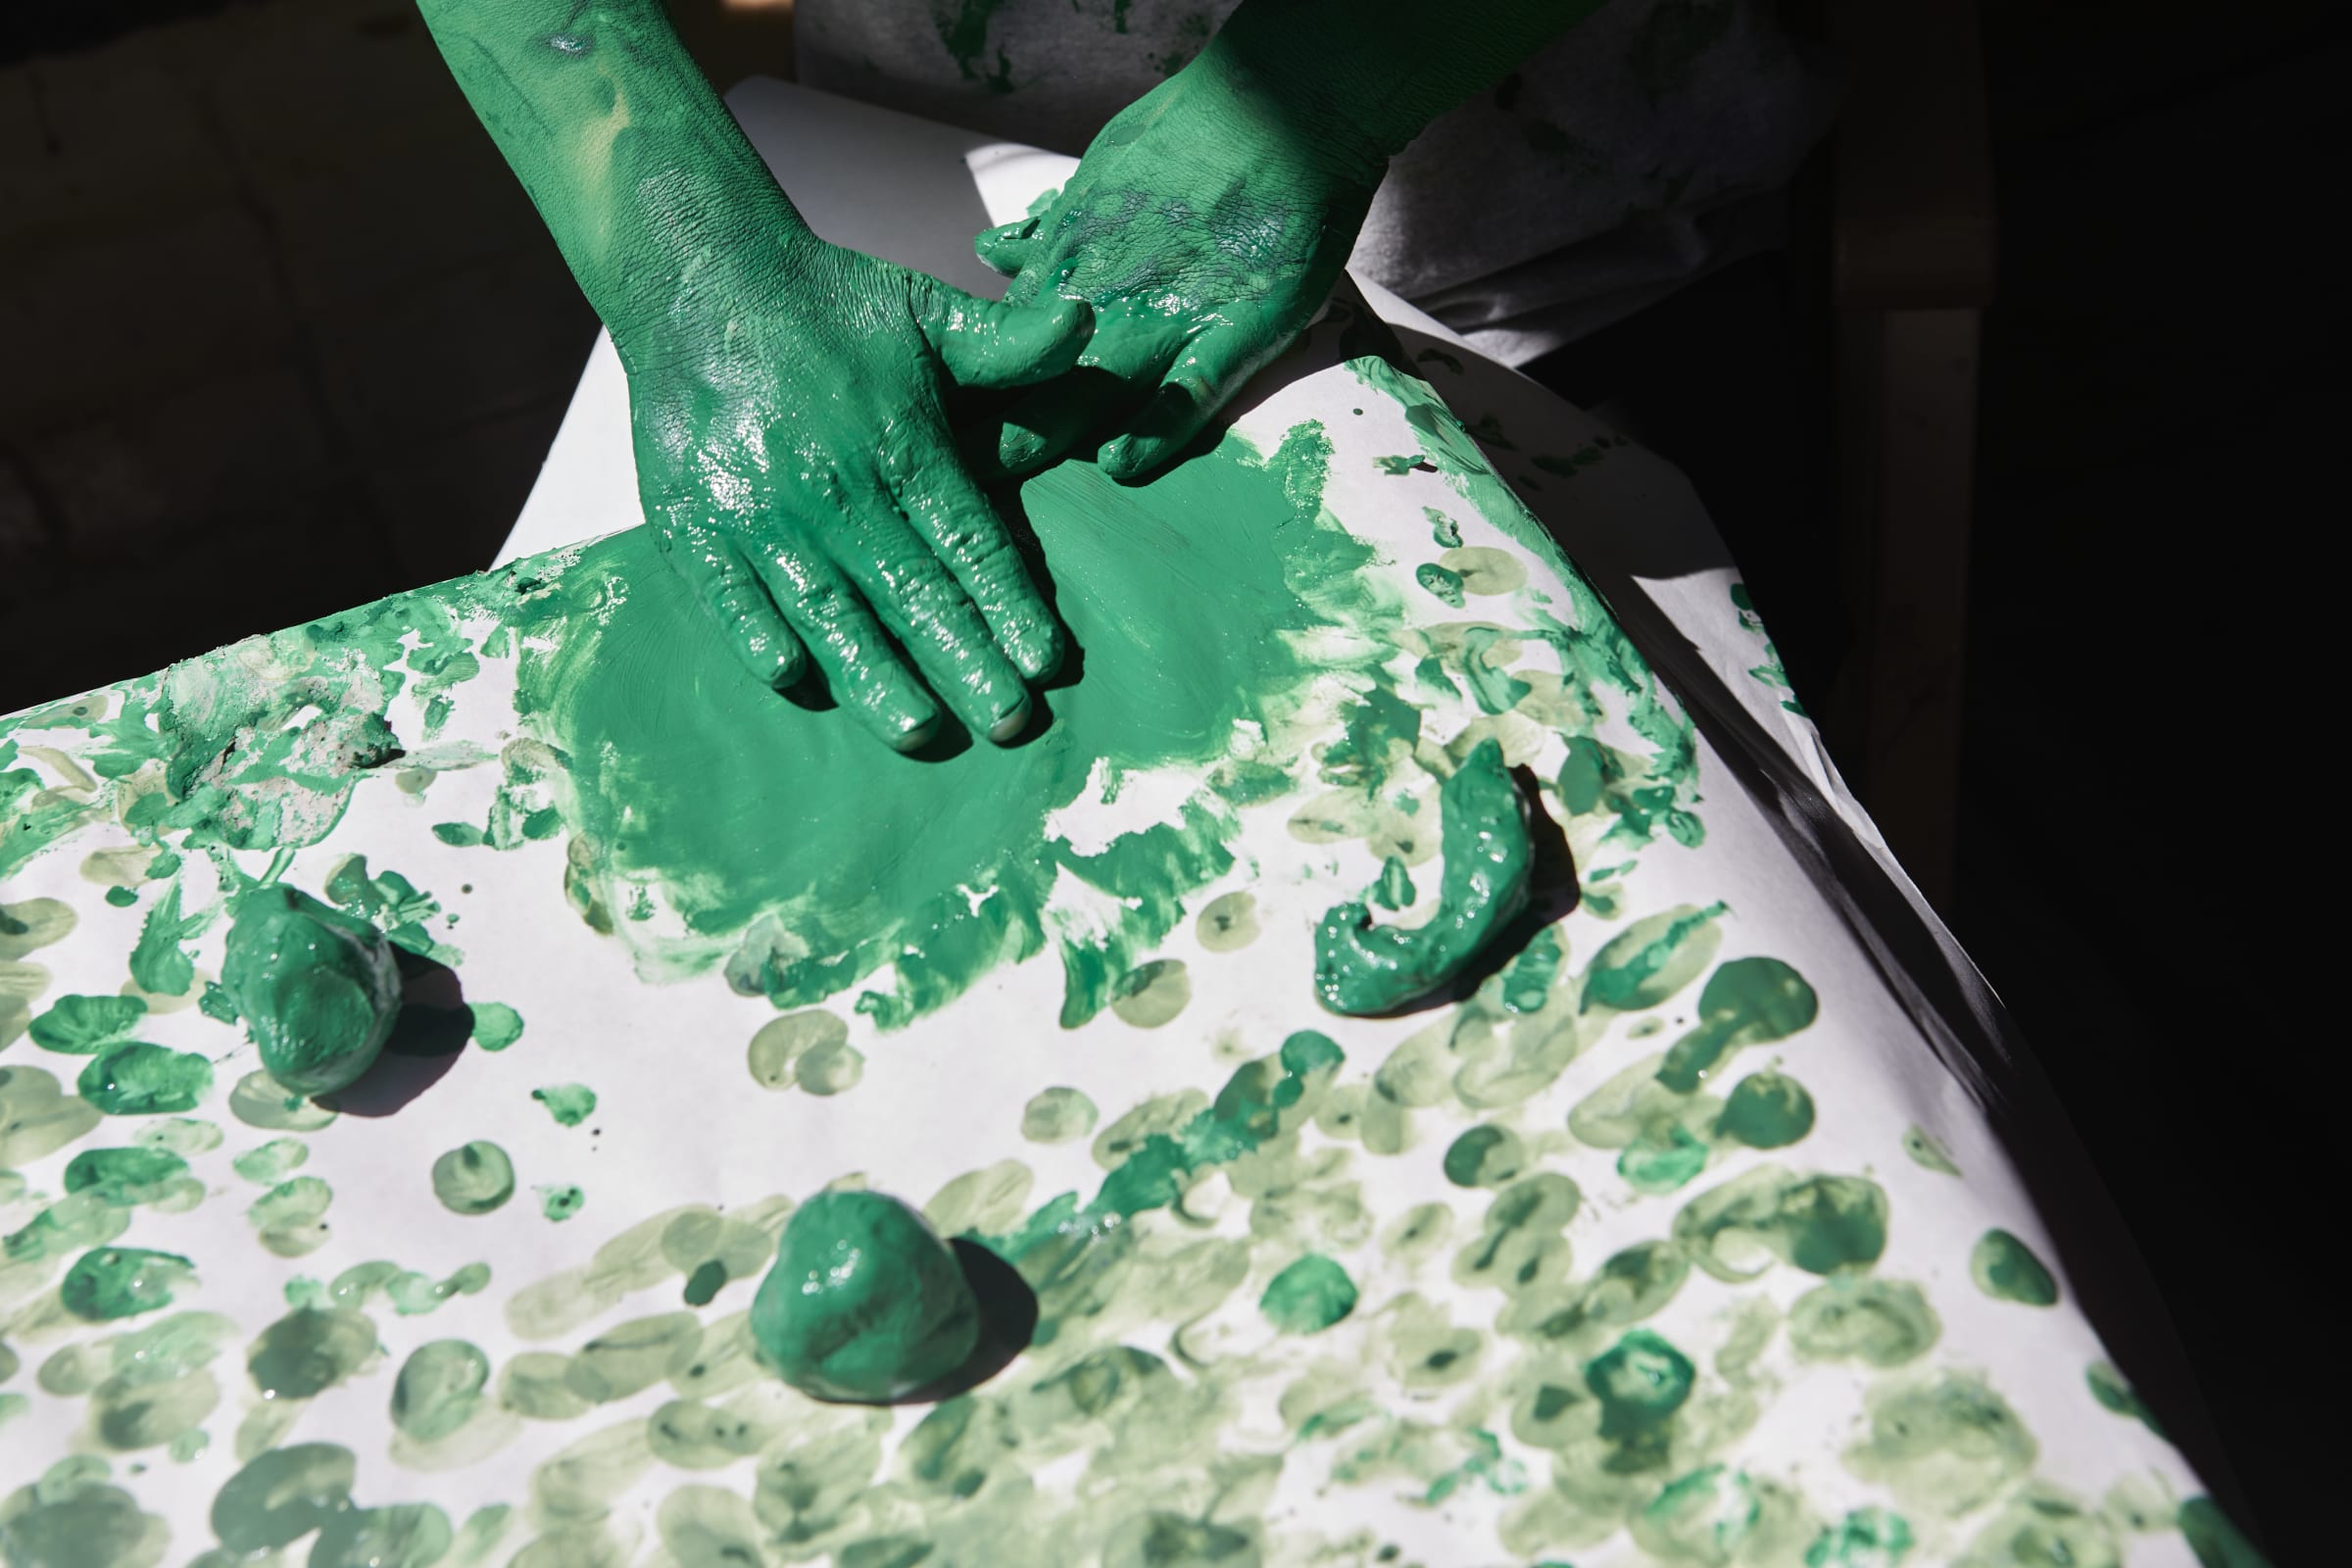 A child's hand covered in green paint, finger painting on a large piece of white paper